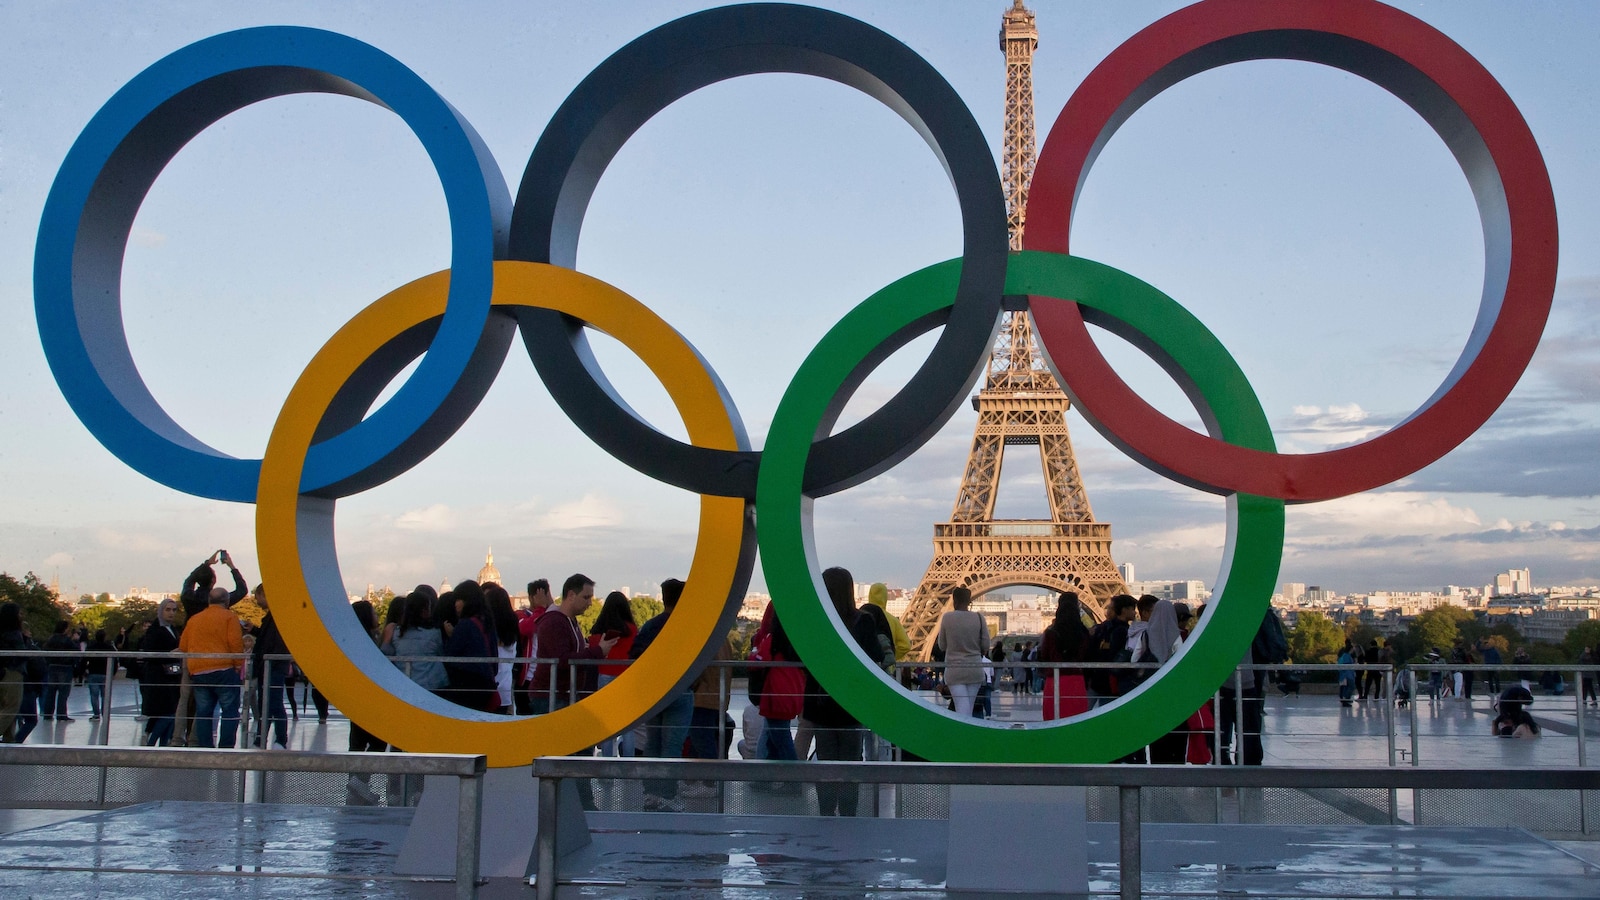 France reduces the number of spectators for Paris 2024 opening ceremony to approximately 300,000.